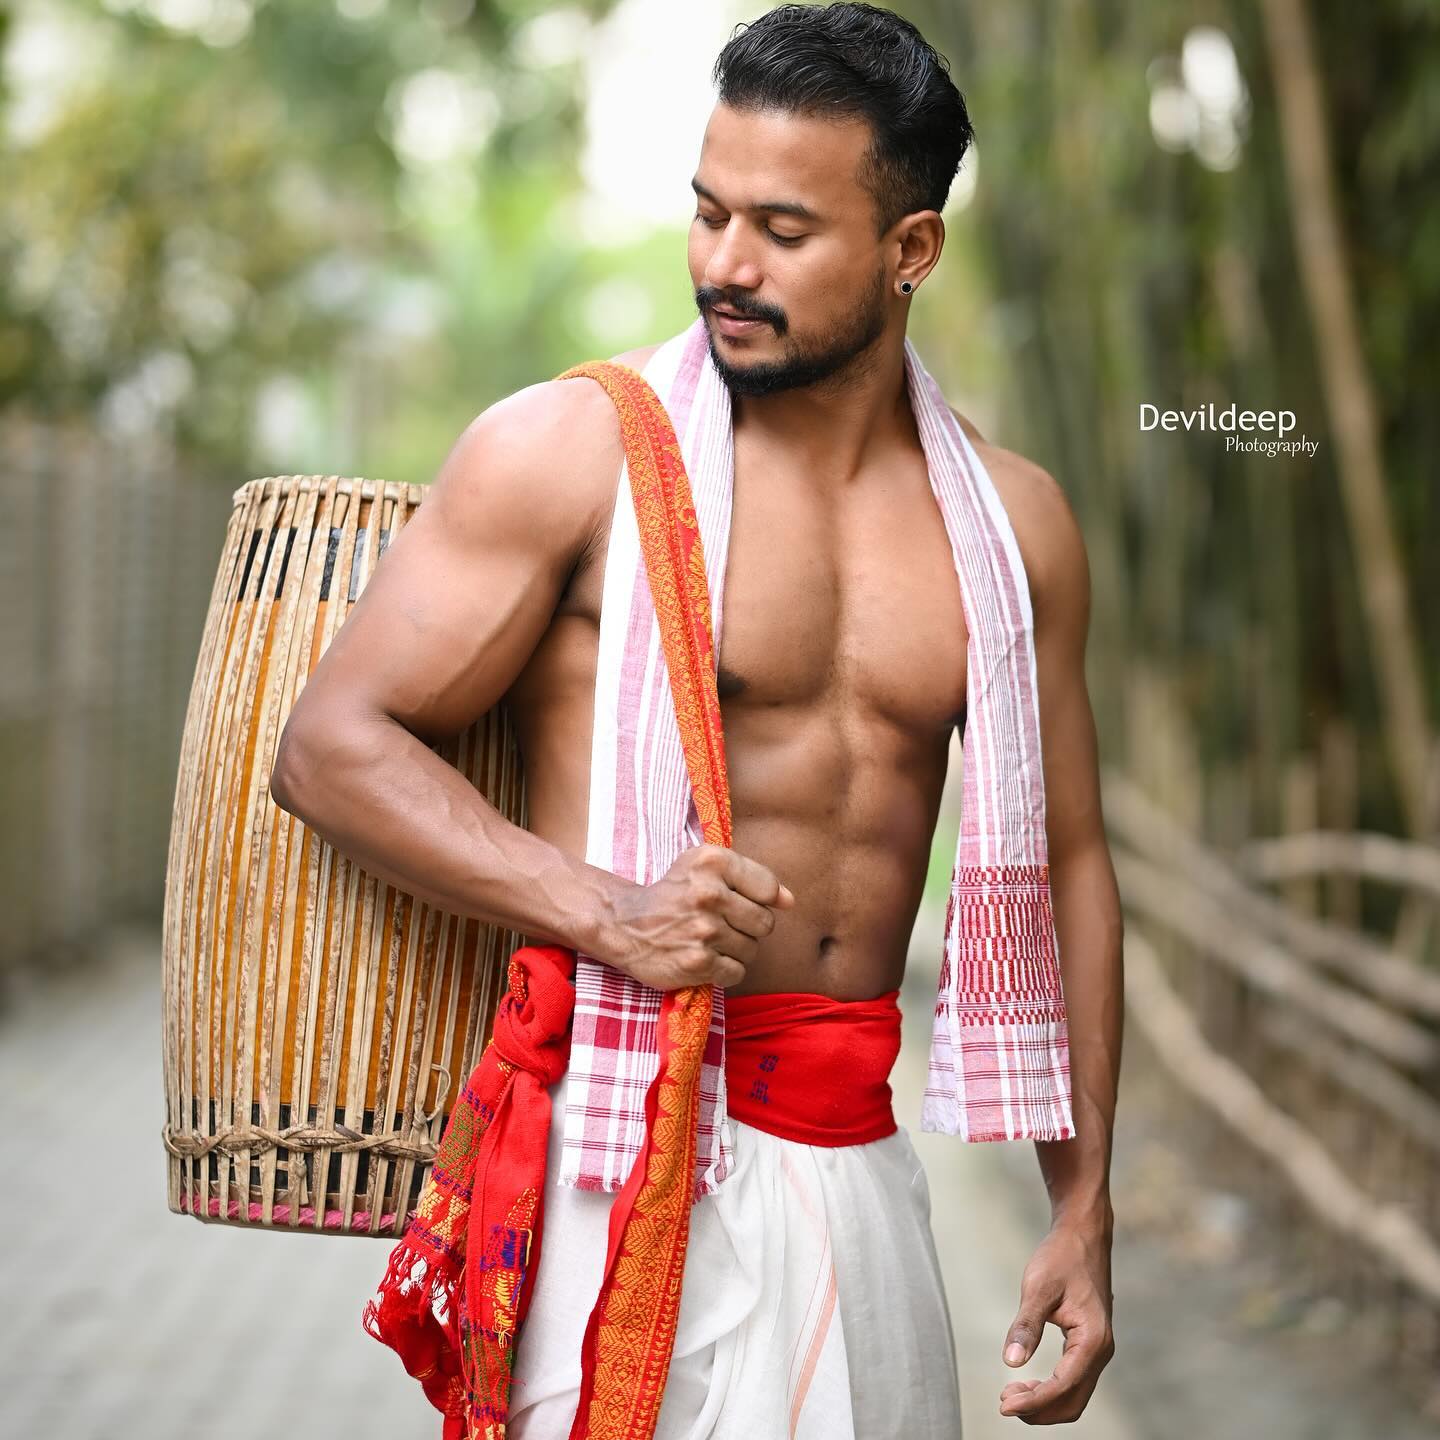 Your Happiness Is Your Own Responsibility 💫
.
.
.
.
.
@raj.amen #bihu #dress #assam #traditional #look #assamis #handsome #boys